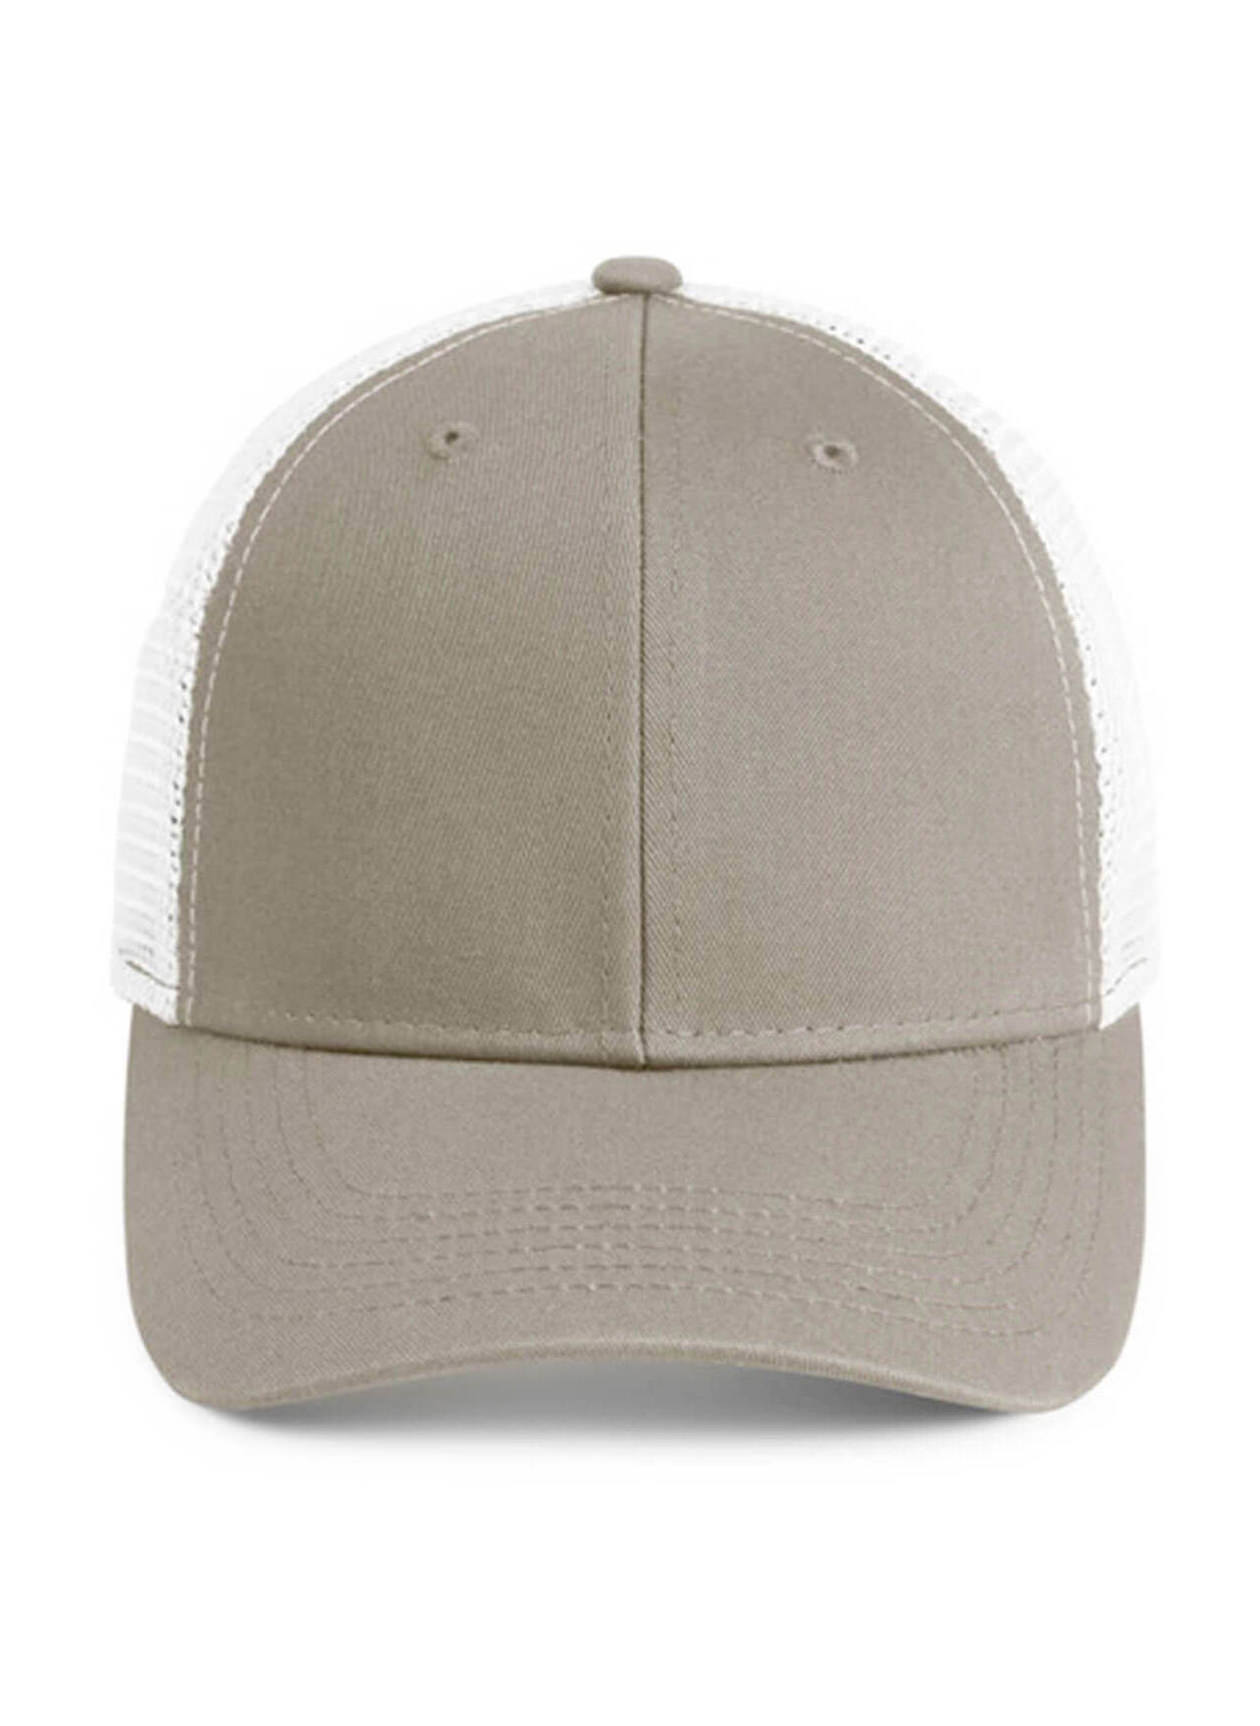 Imperial Khaki / White The Catch & Release Hat Adjustable Meshback Hat